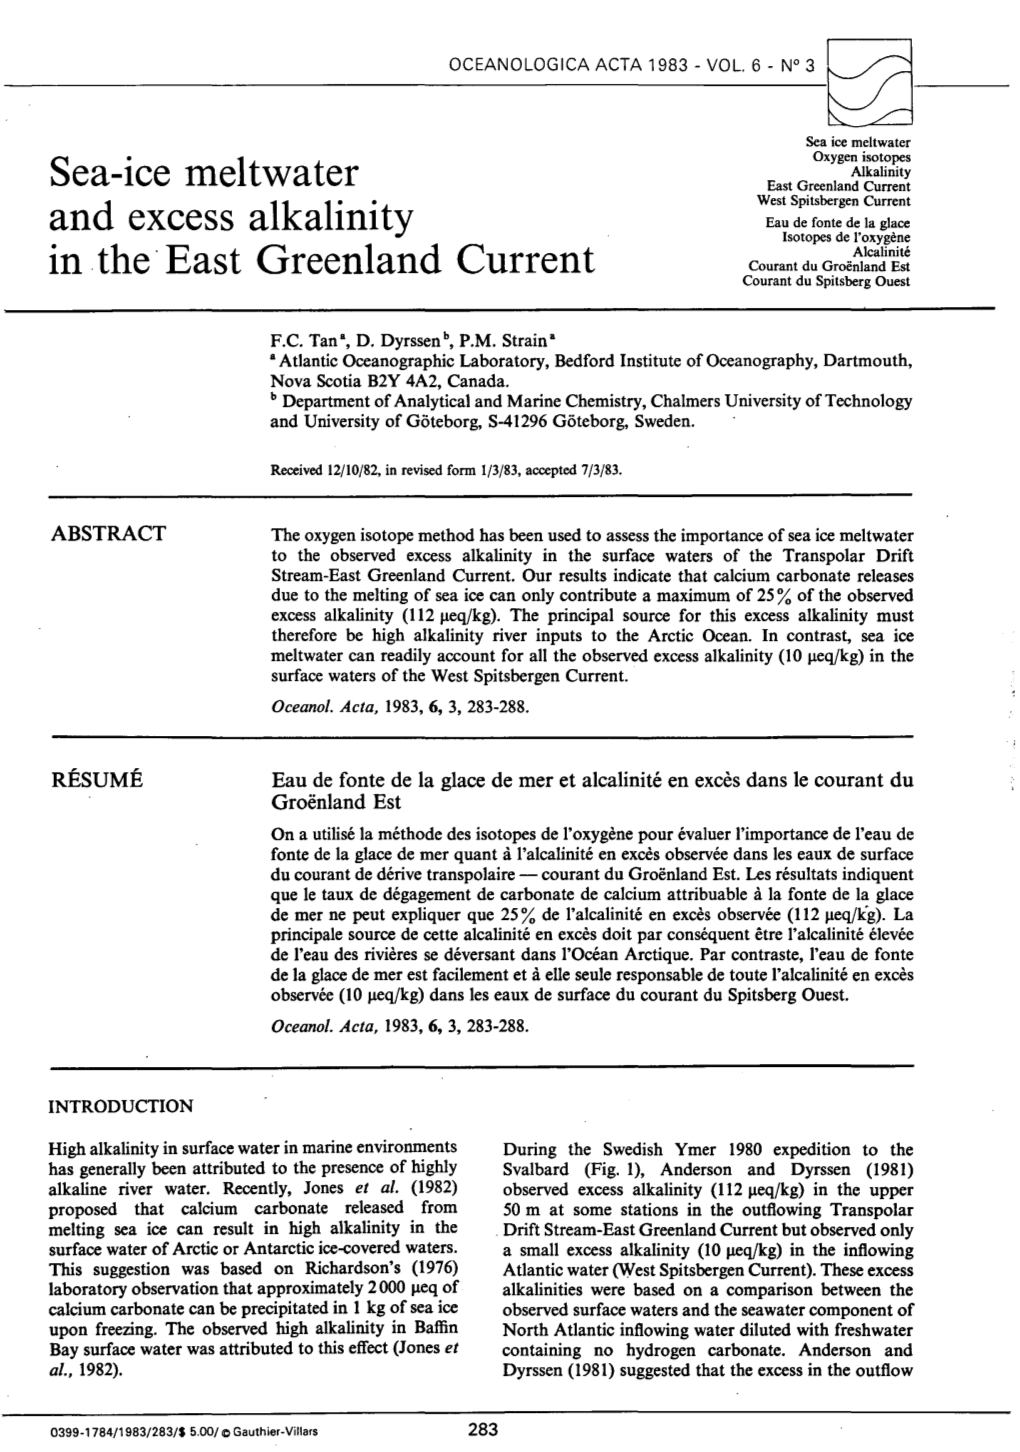 Sea-Ice Meltwater and Excess Alkalinity in the East Greenland